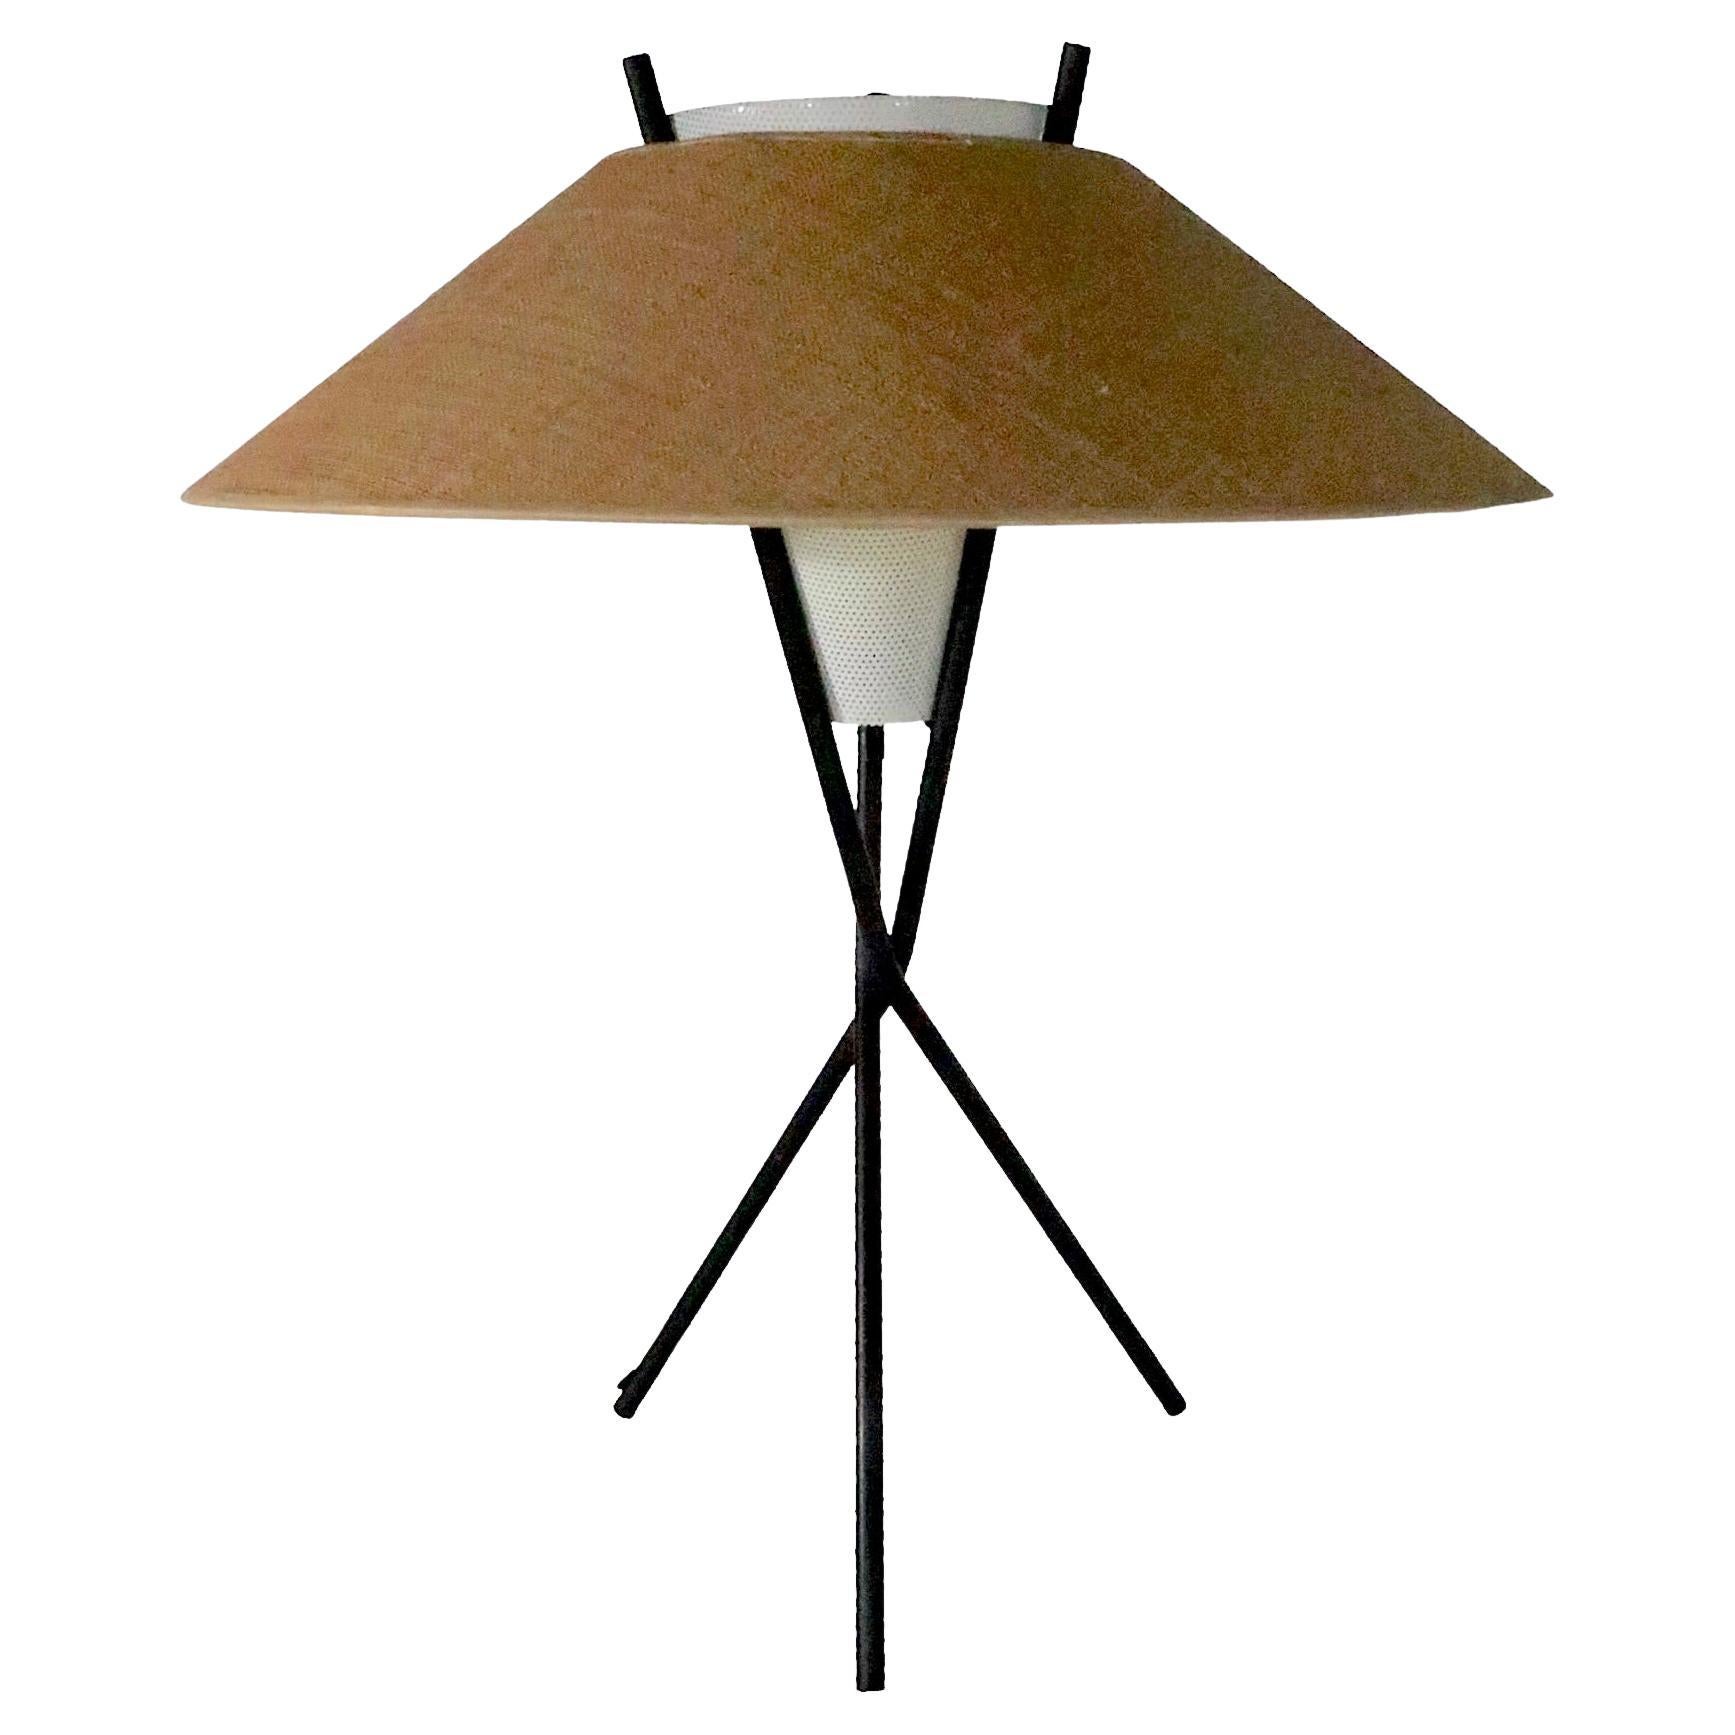 Midcentury Tri Pod Table Lamp by Gerald Thurston for Lightolier C 1950s For Sale